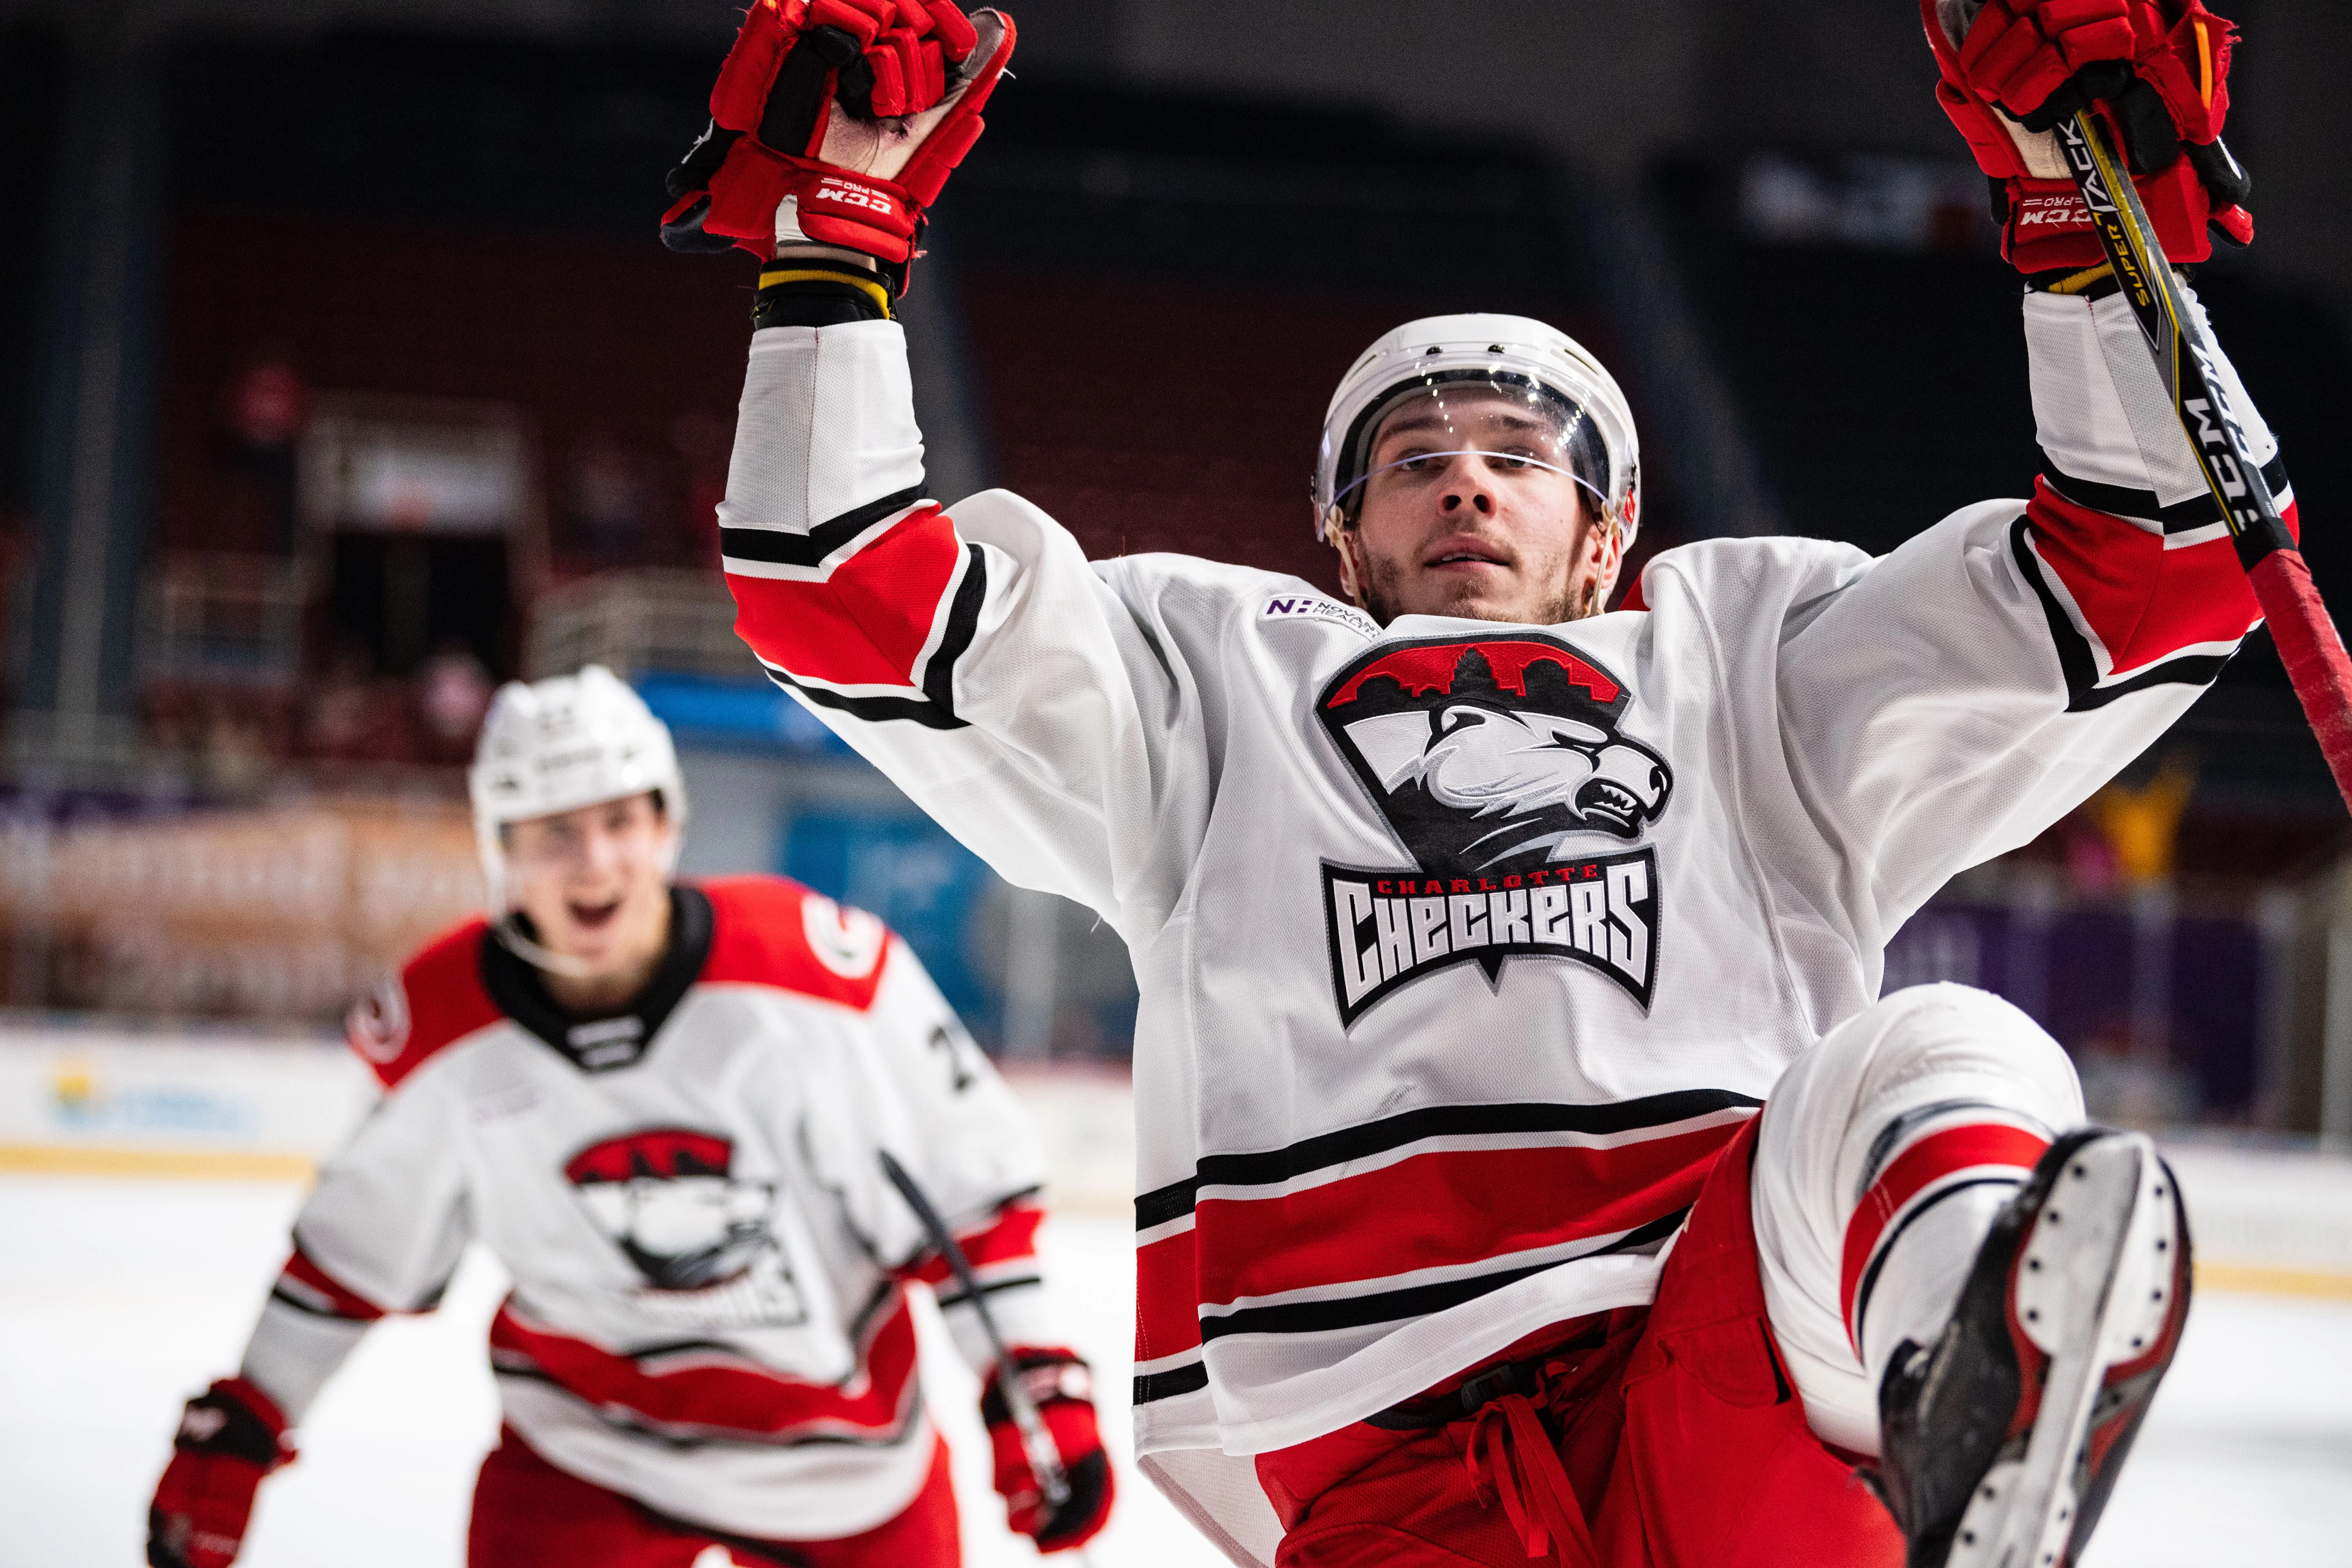 charlotte checkers jersey